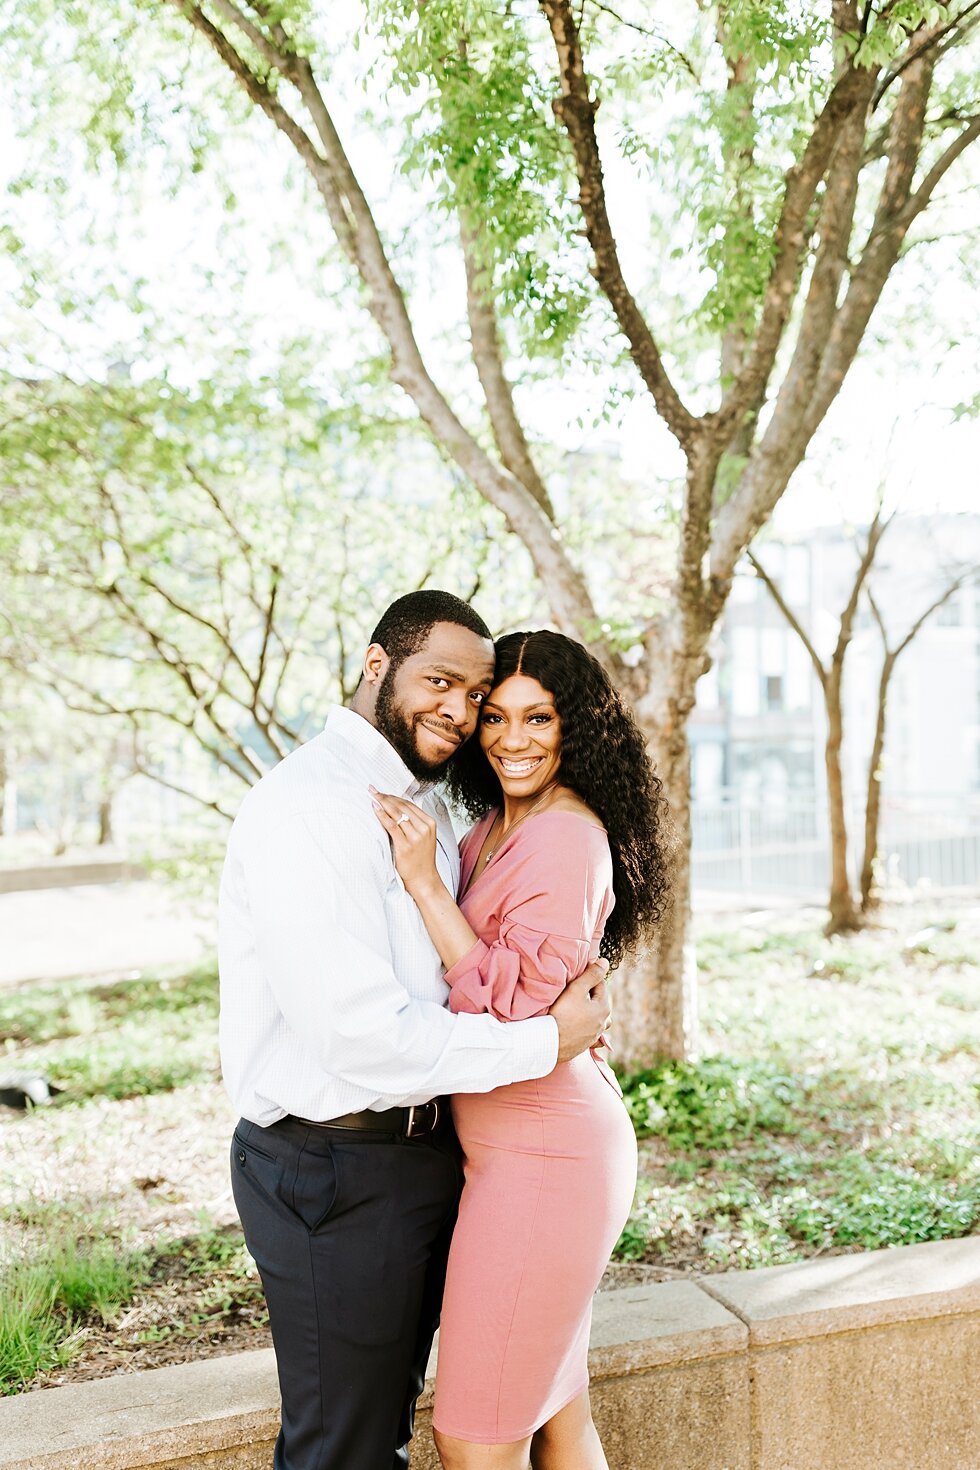  Smiling and holding each other close this African American couple urban engagement pictures in downtown Louisville Muhammad Ali center and belvedere #engaged #muhumadalicenter #belvedere #shesaidyes #engaged #padbl #photographyanddesignbylauren #urb